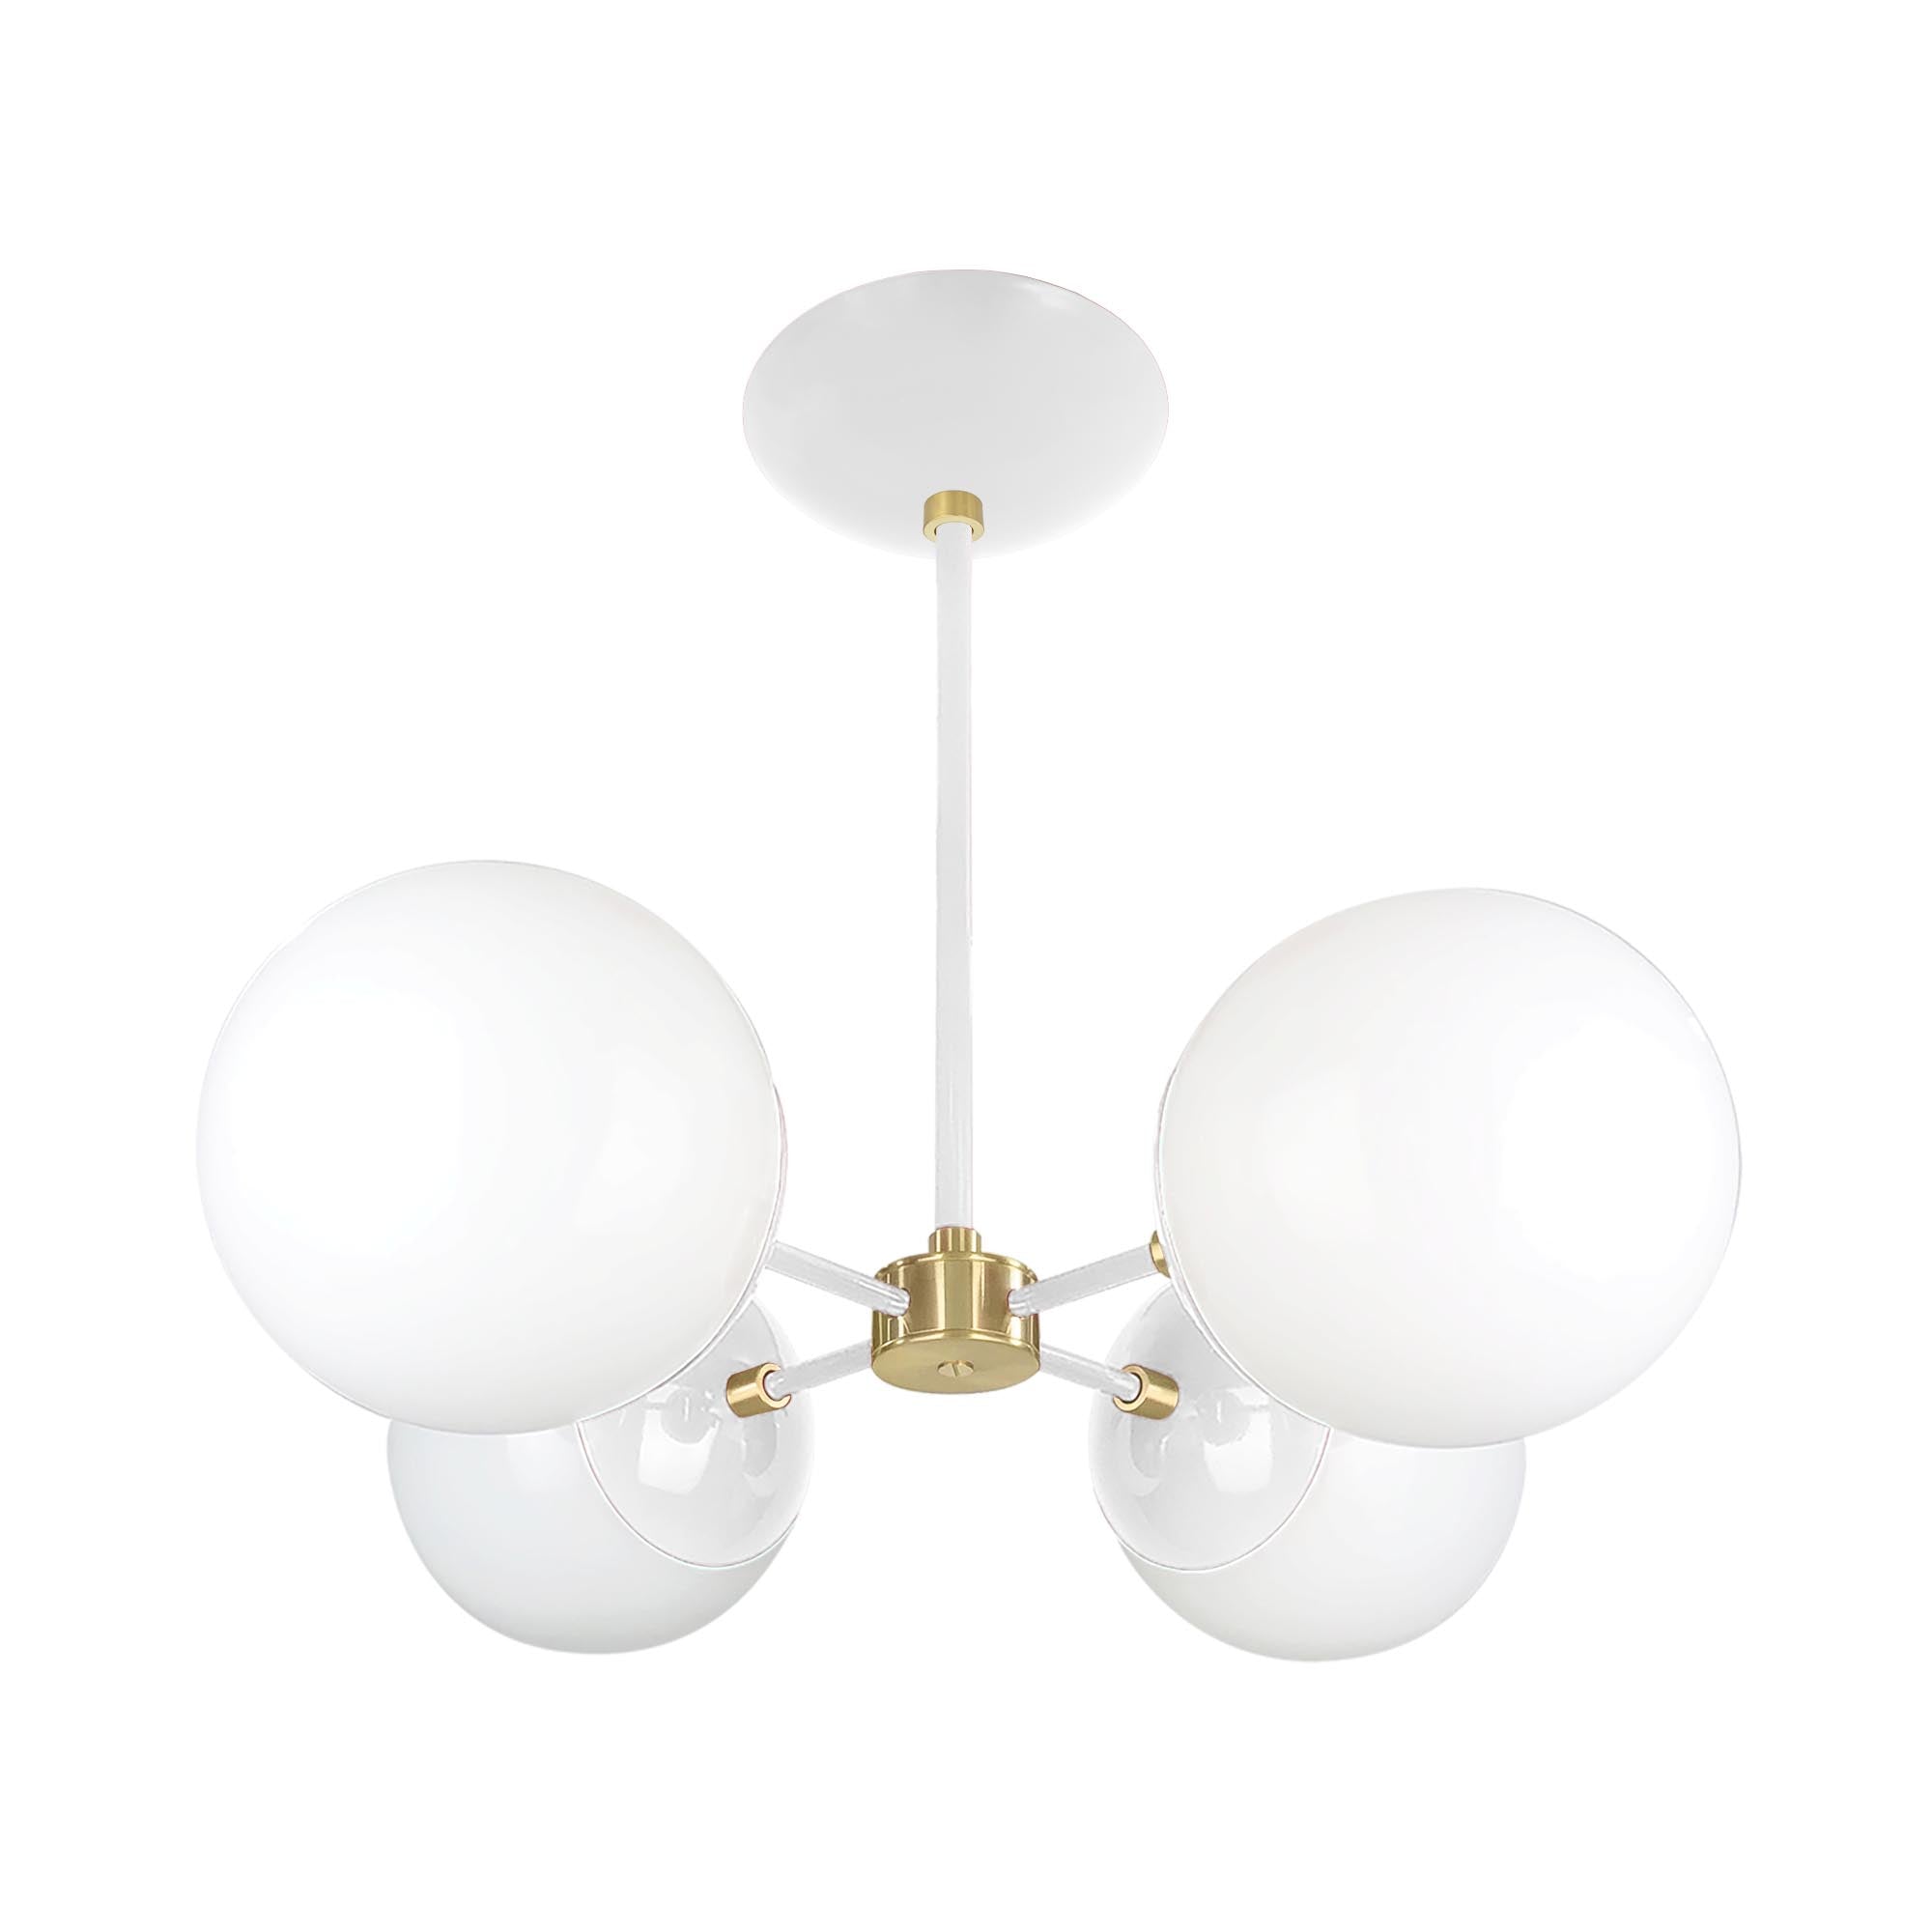 Brass and white color Orbi chandelier Dutton Brown lighting